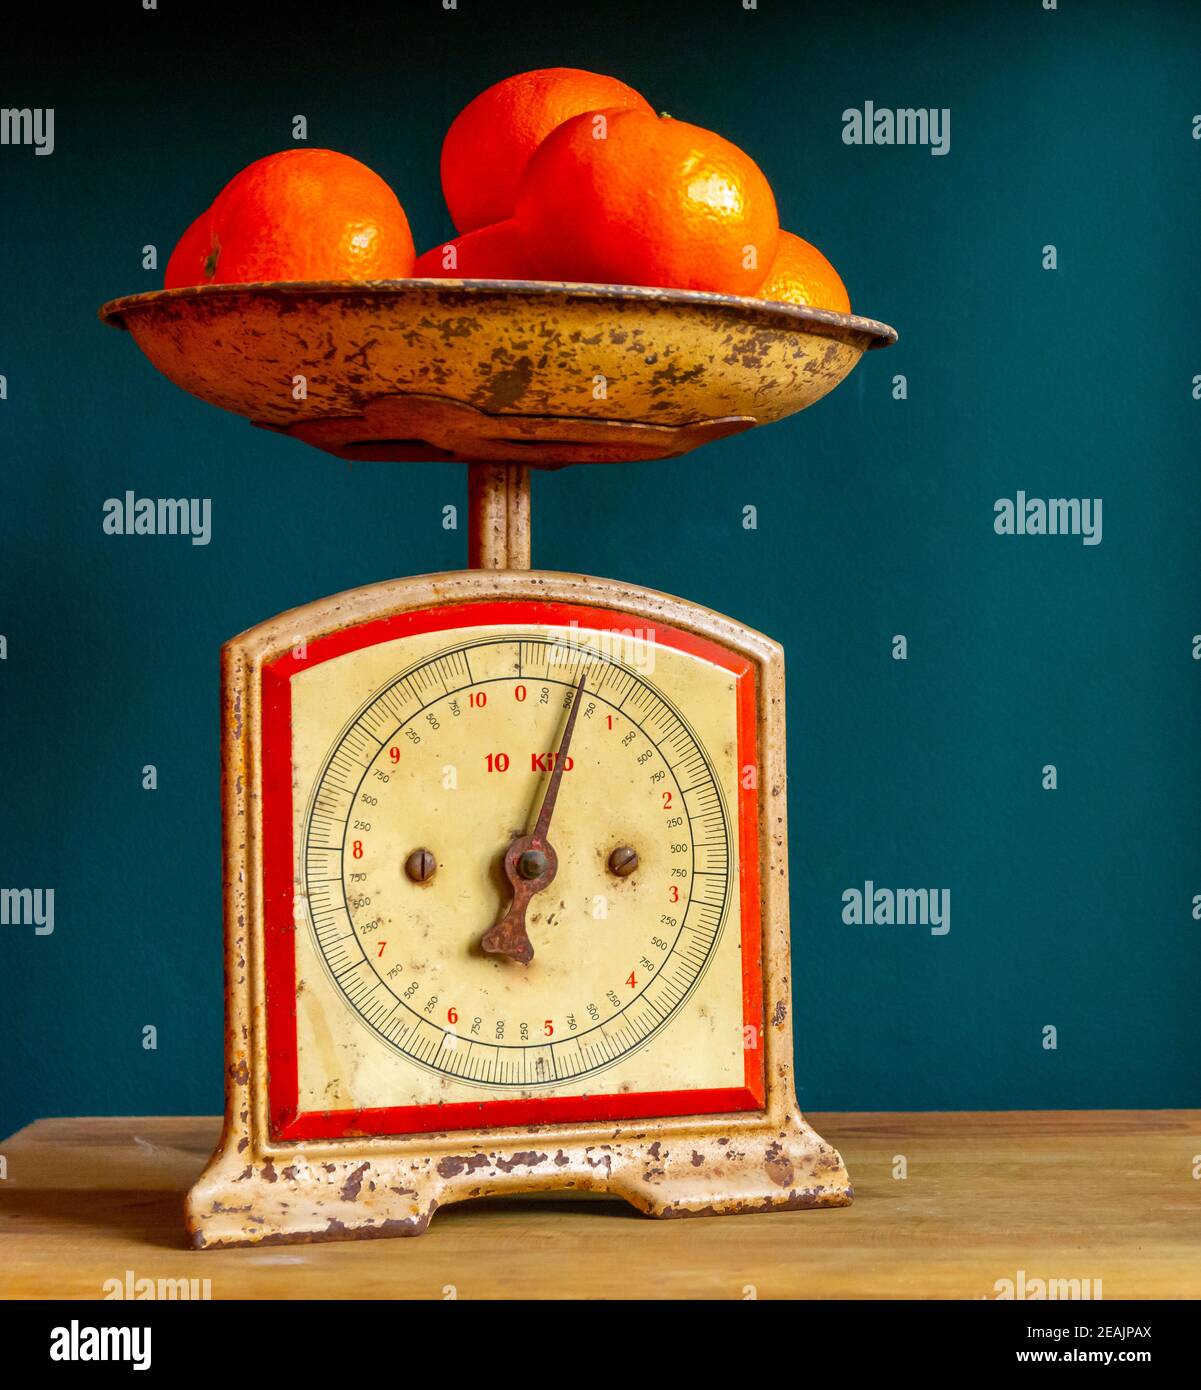 Weighing tangerines in a retro, vintage and worn out scale or balance, on a wooden plank against a guatemala green wall. Stock Photo